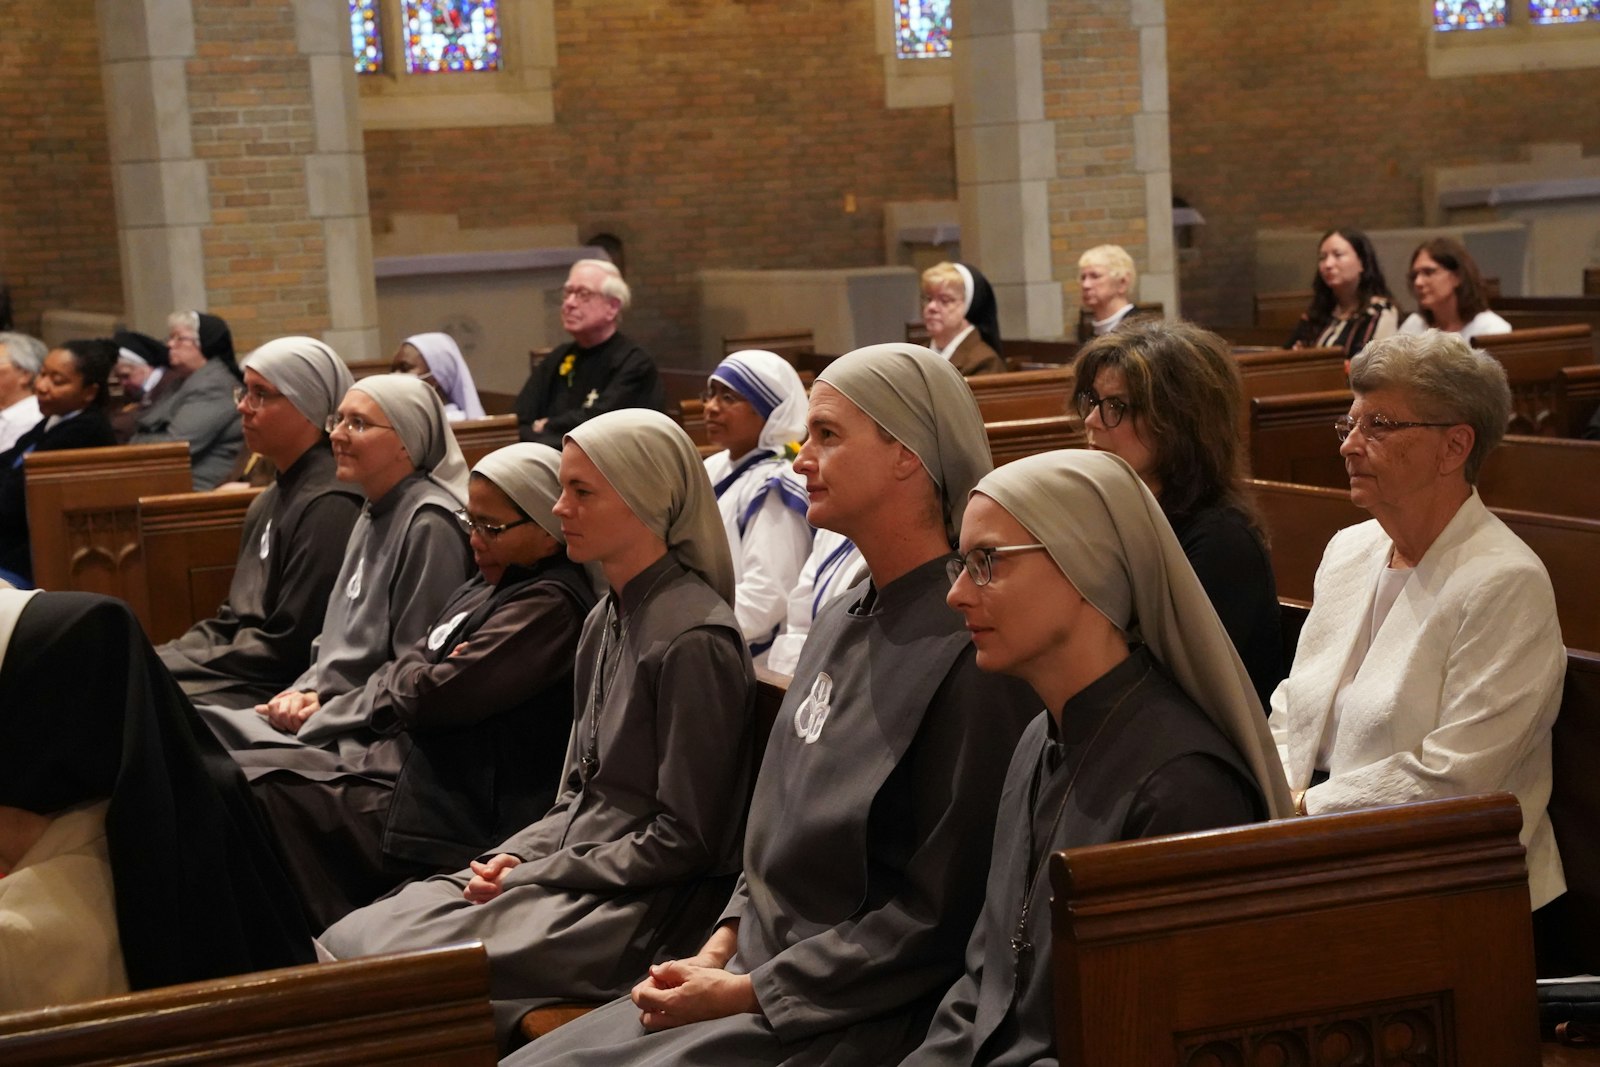 Members of the Society of the Our Lady of the Most Holy Trinity (SOLT) sit together during the 2023 Mass for consecrated life jubilarians at Sacred Heart Major Seminary in Detroit on Sept. 9. Archbishop Allen H. Vigneron said the Mass was a chance for professed religious men and women to reflect on all the graces, both public and private, they have received through their ministries.